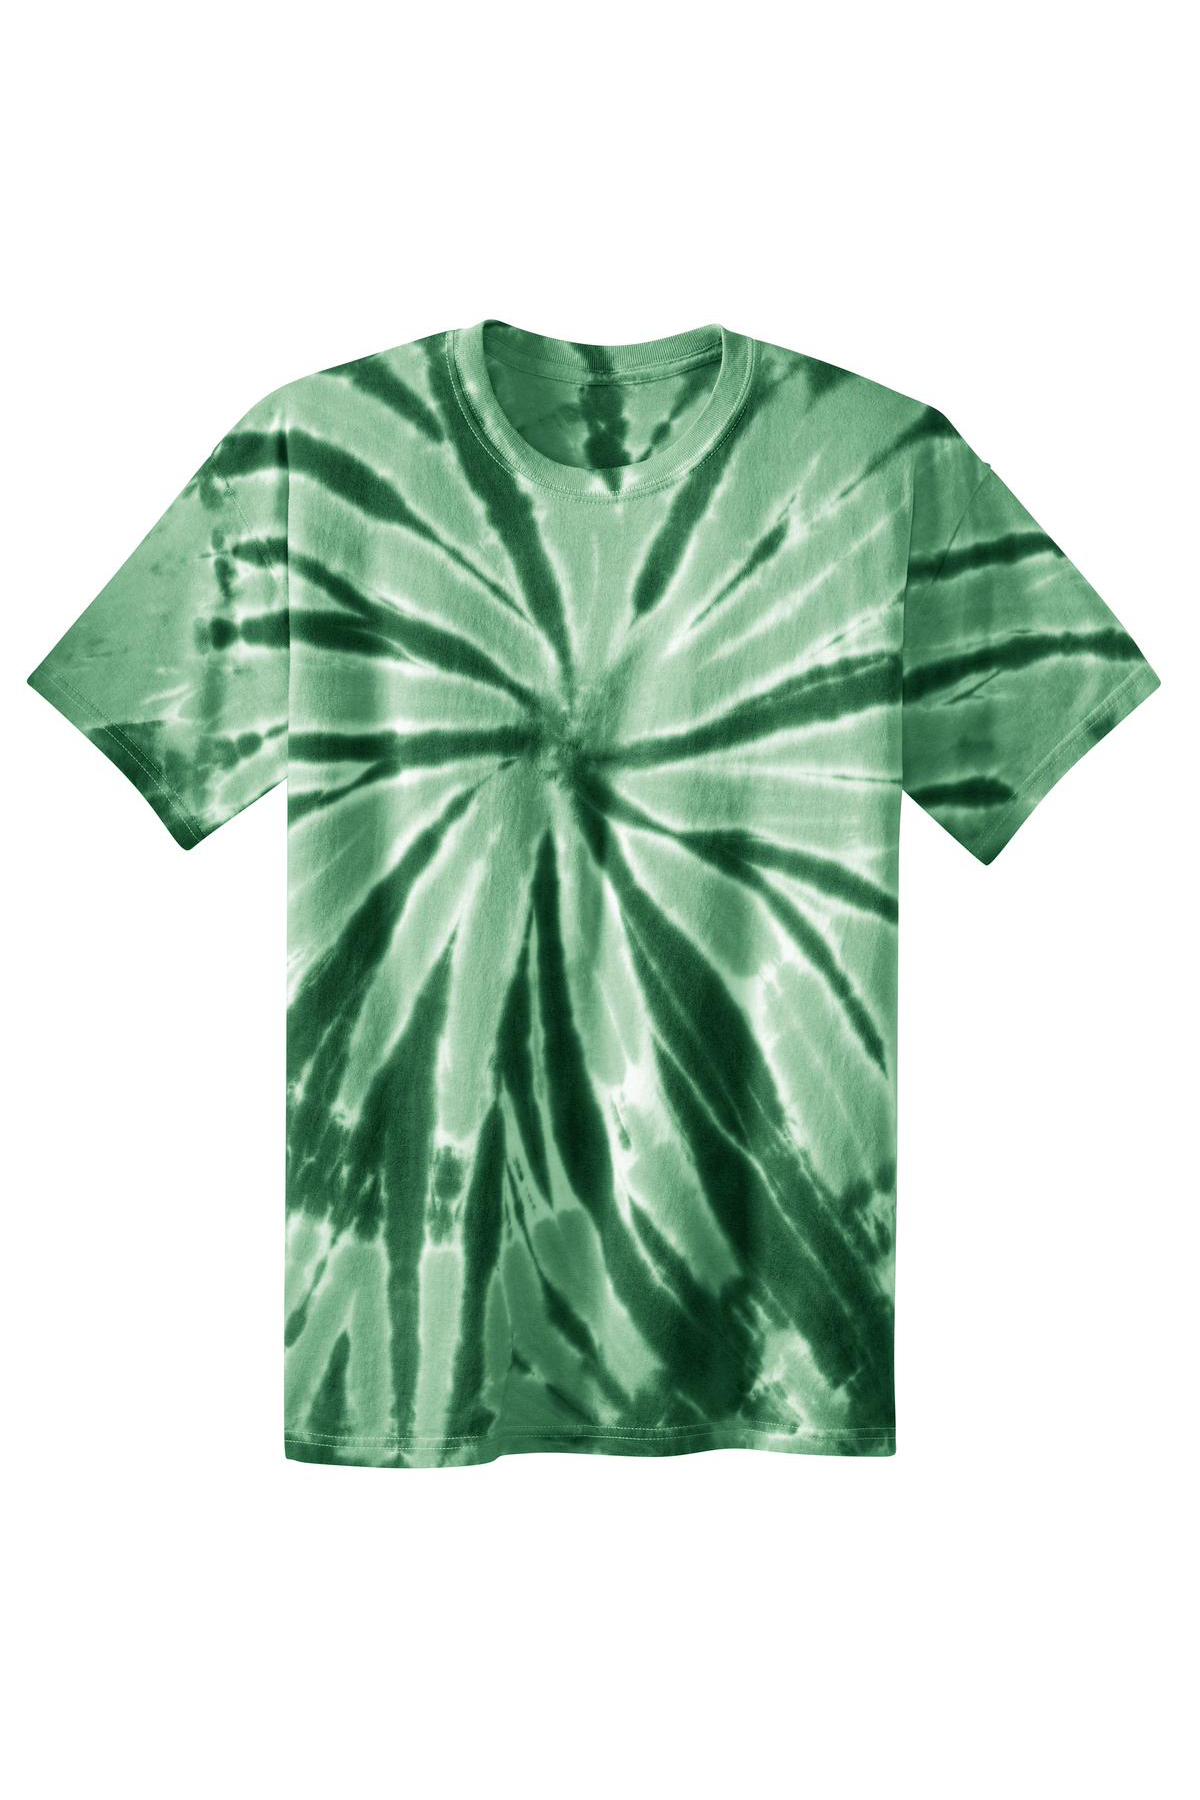 IOliveYou Green-Olive-Teel-Forest Tie Dye Kit in Olive Dye Forest Tie Dye –  Custom Clothing Dye with 8 Refills for Kids & Large Groups- Tie Dye Party